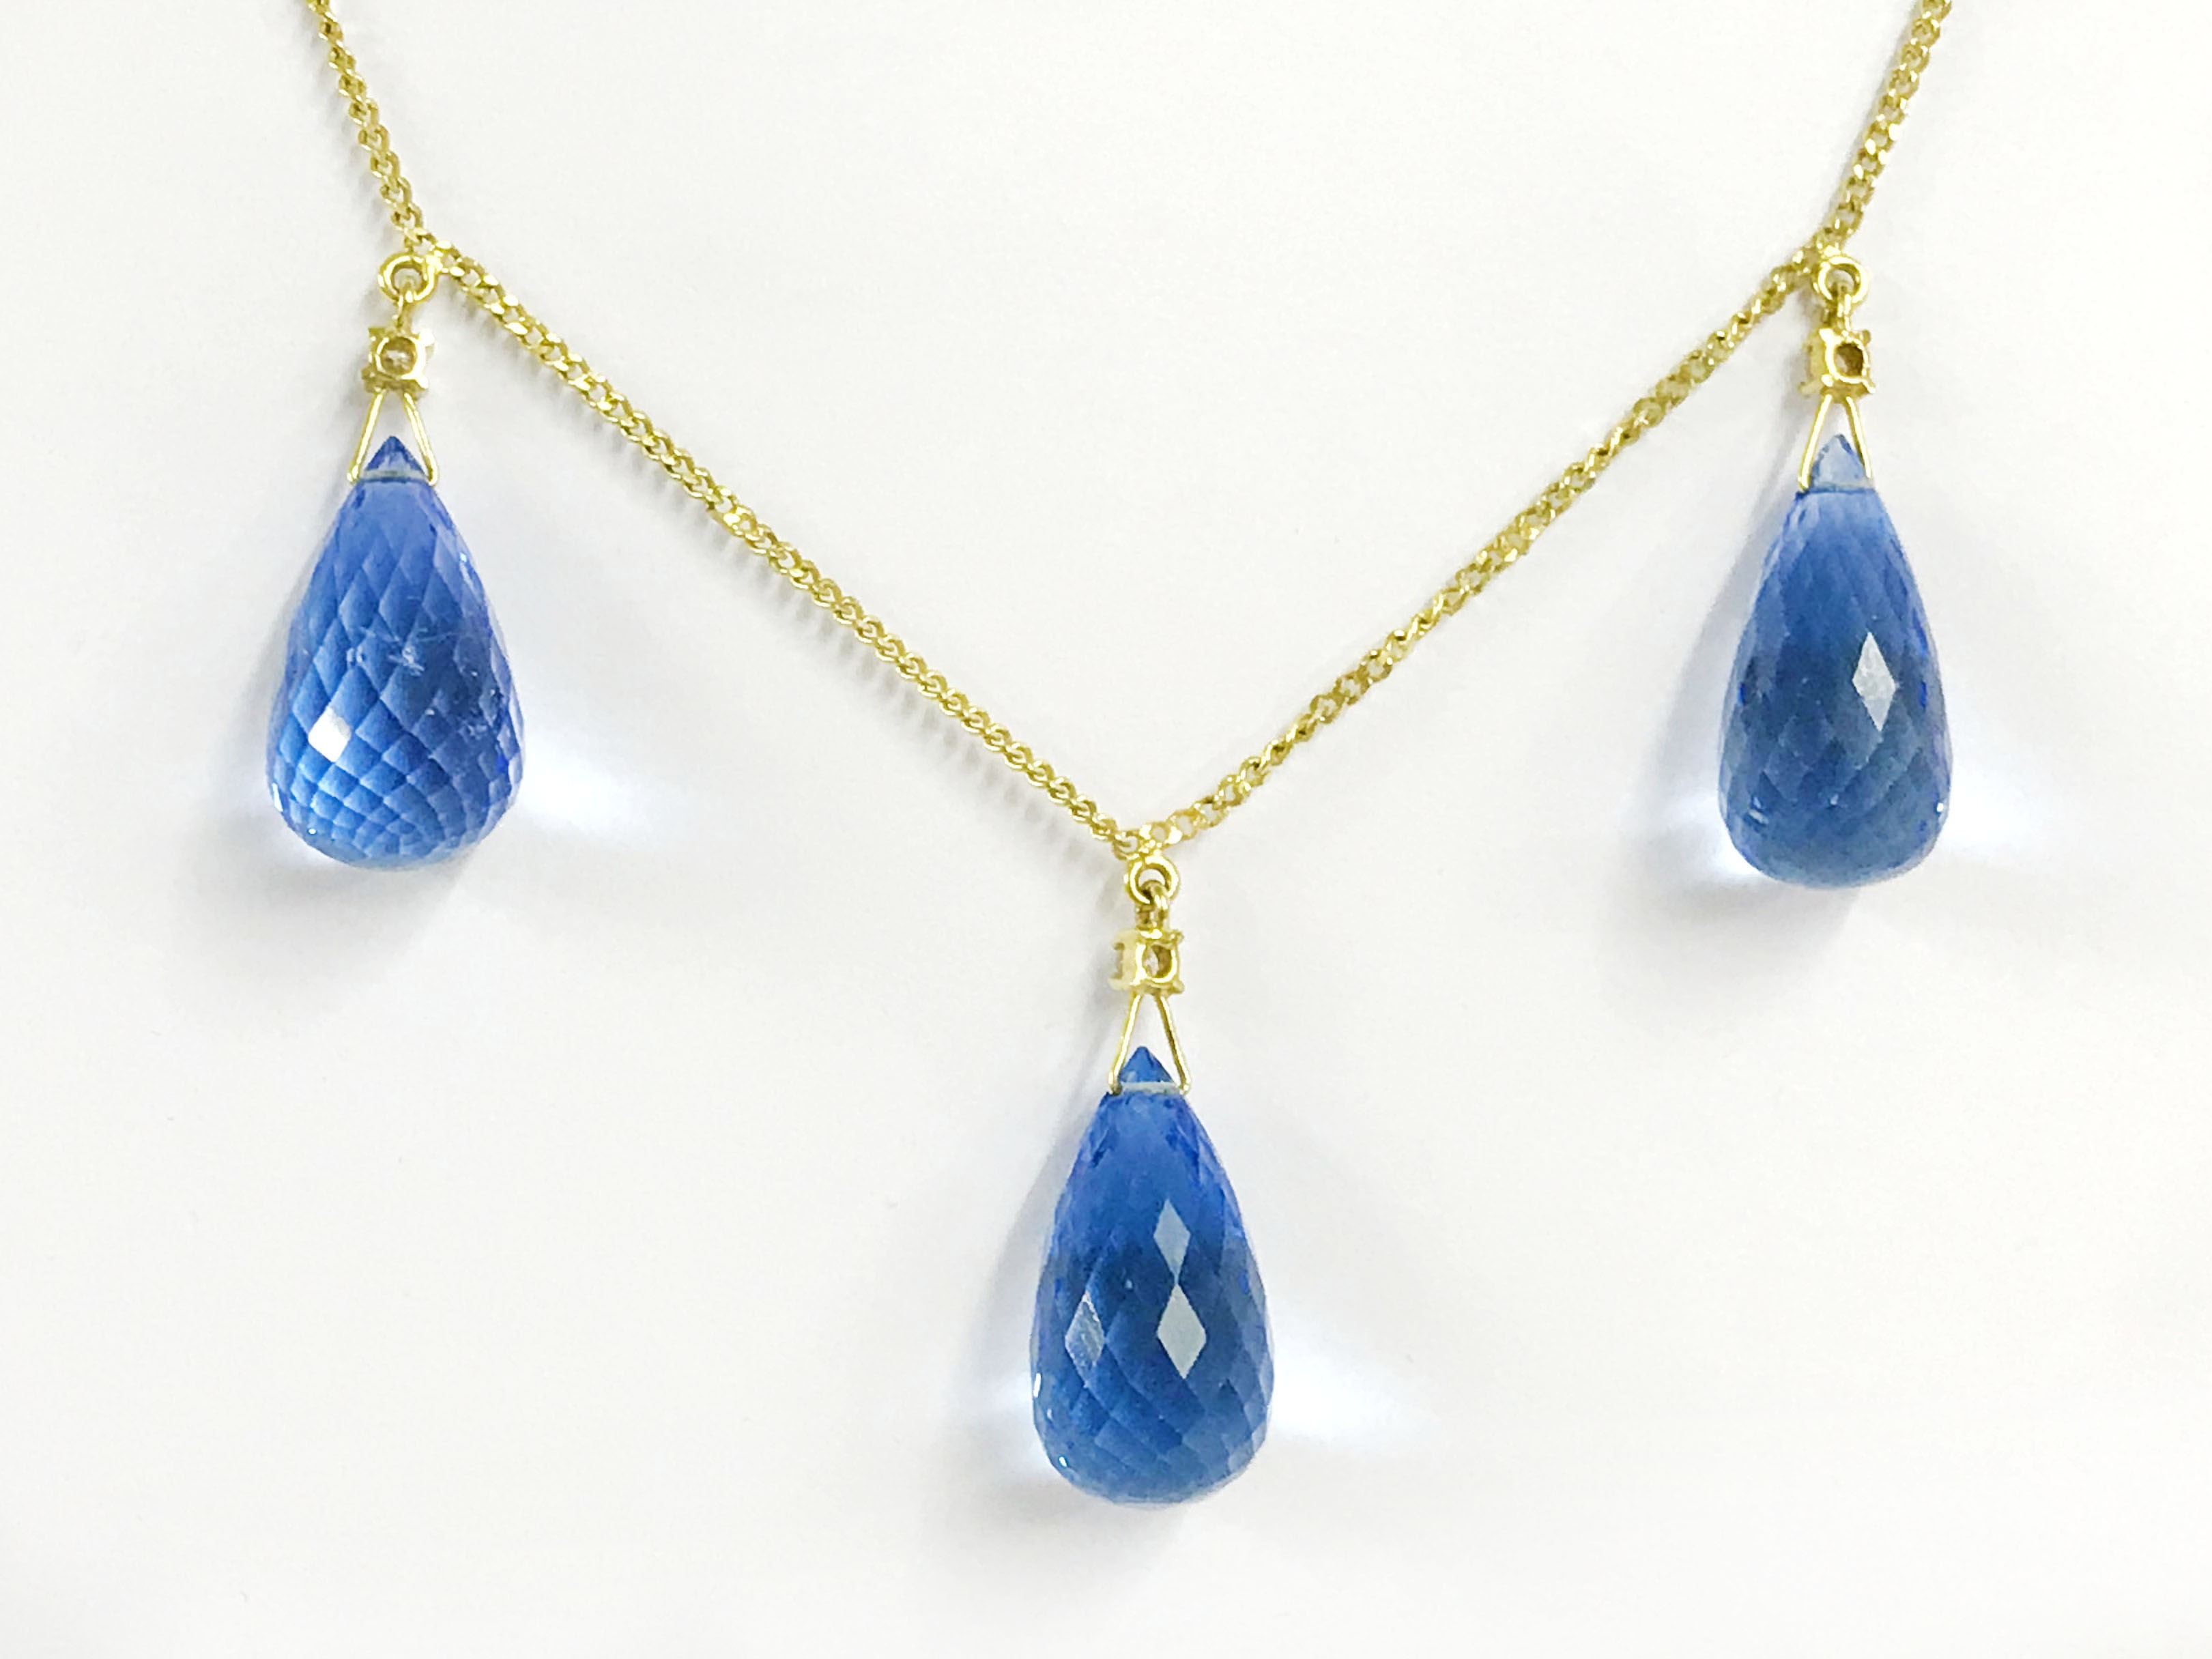 18CT GOLD BLUE TOPAZ NECKLACE - Image 2 of 5